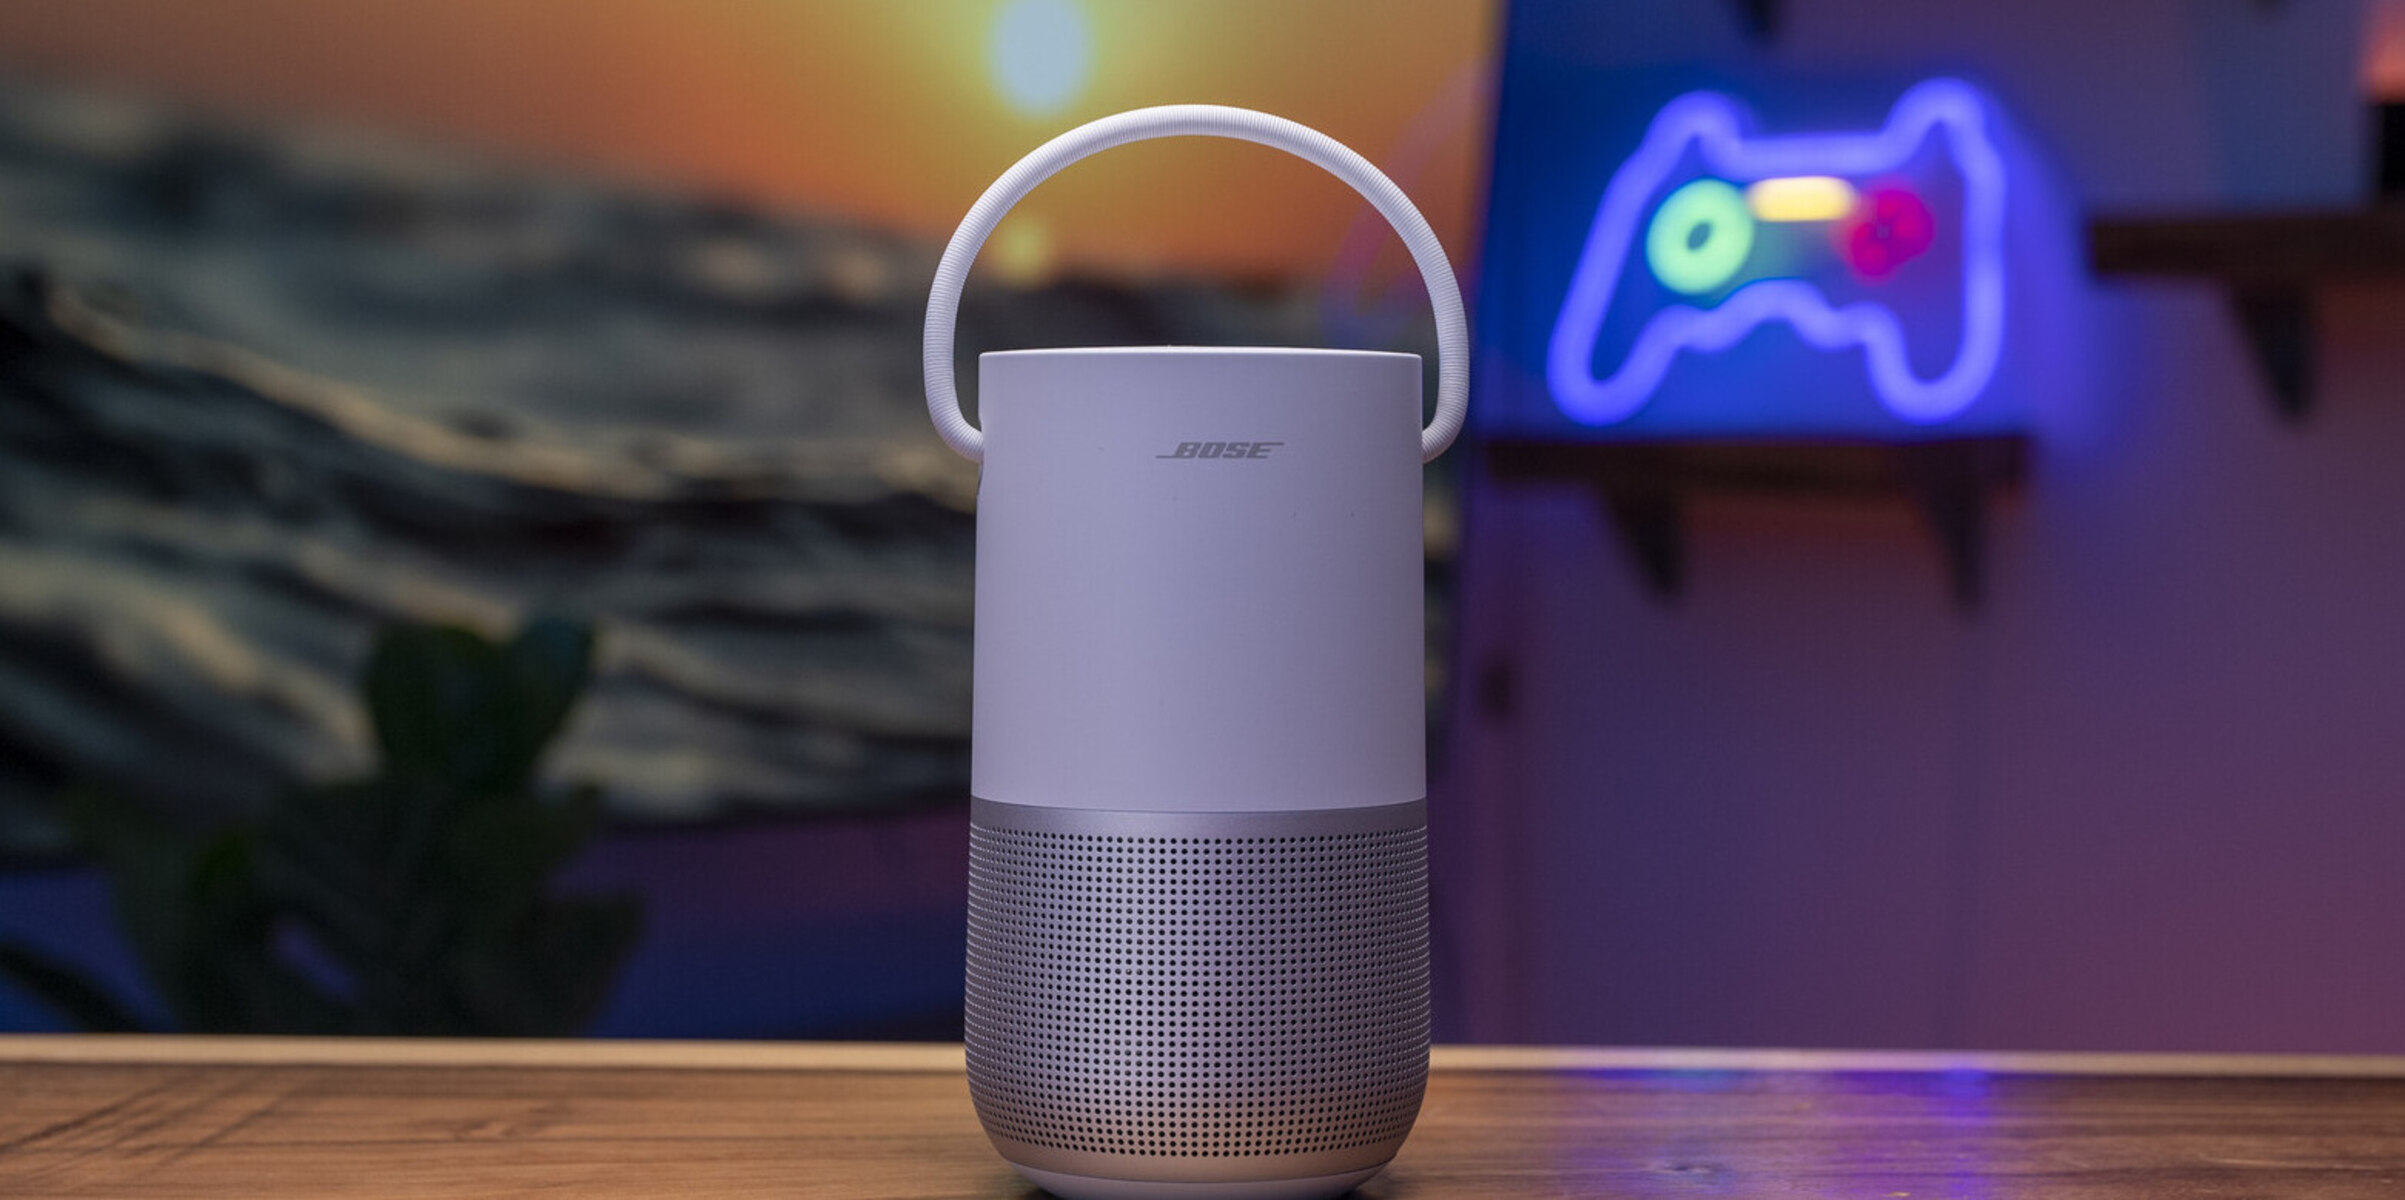 How To Connect Bose Smart Speaker